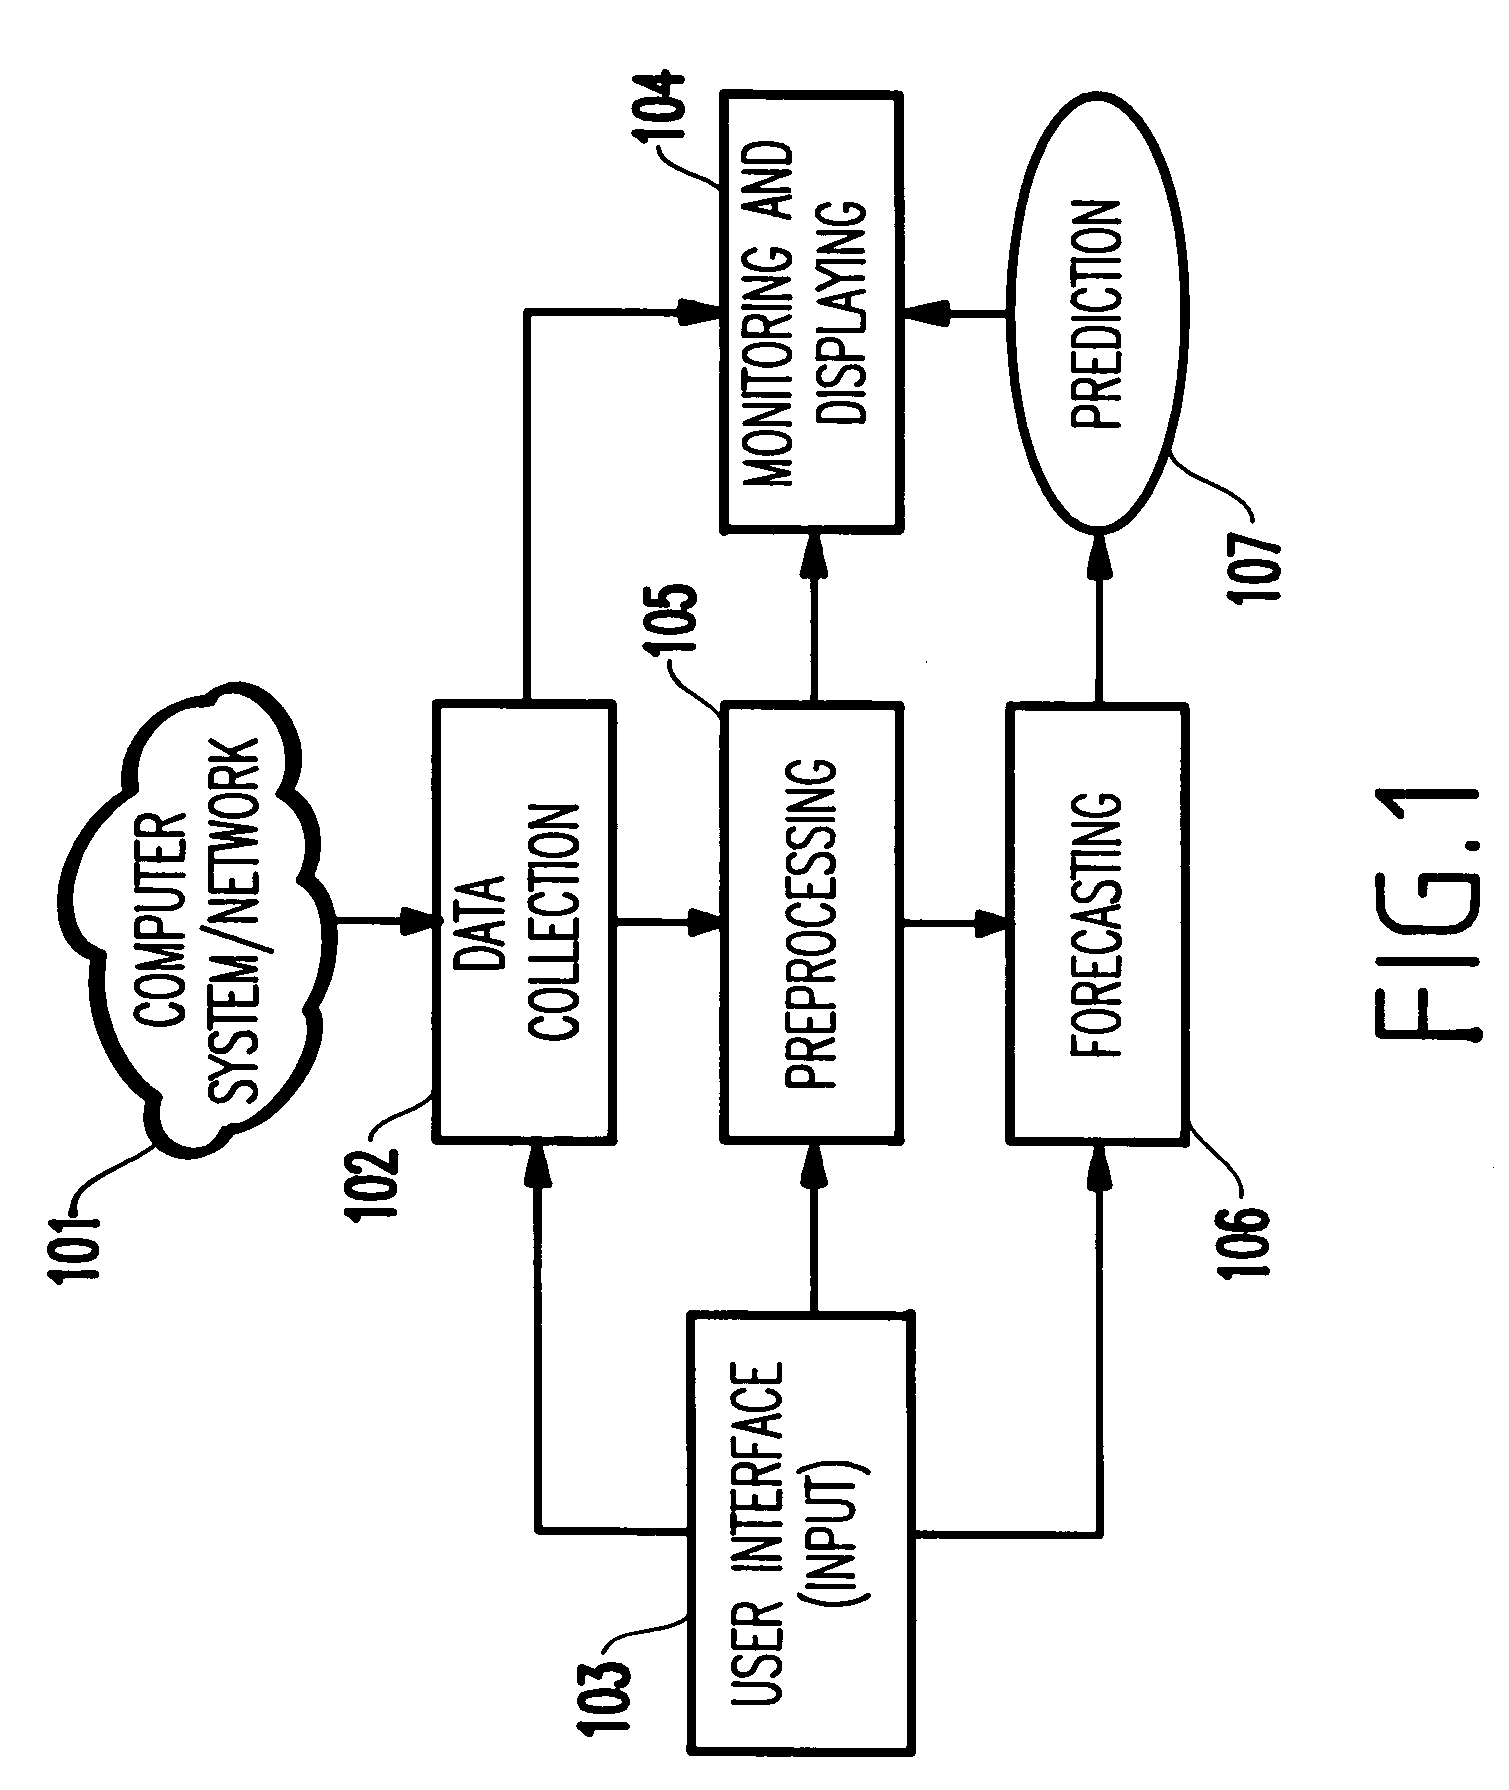 Method and apparatus for preprocessing technique for forecasting in capacity management, software rejuvenation and dynamic resource allocation applications